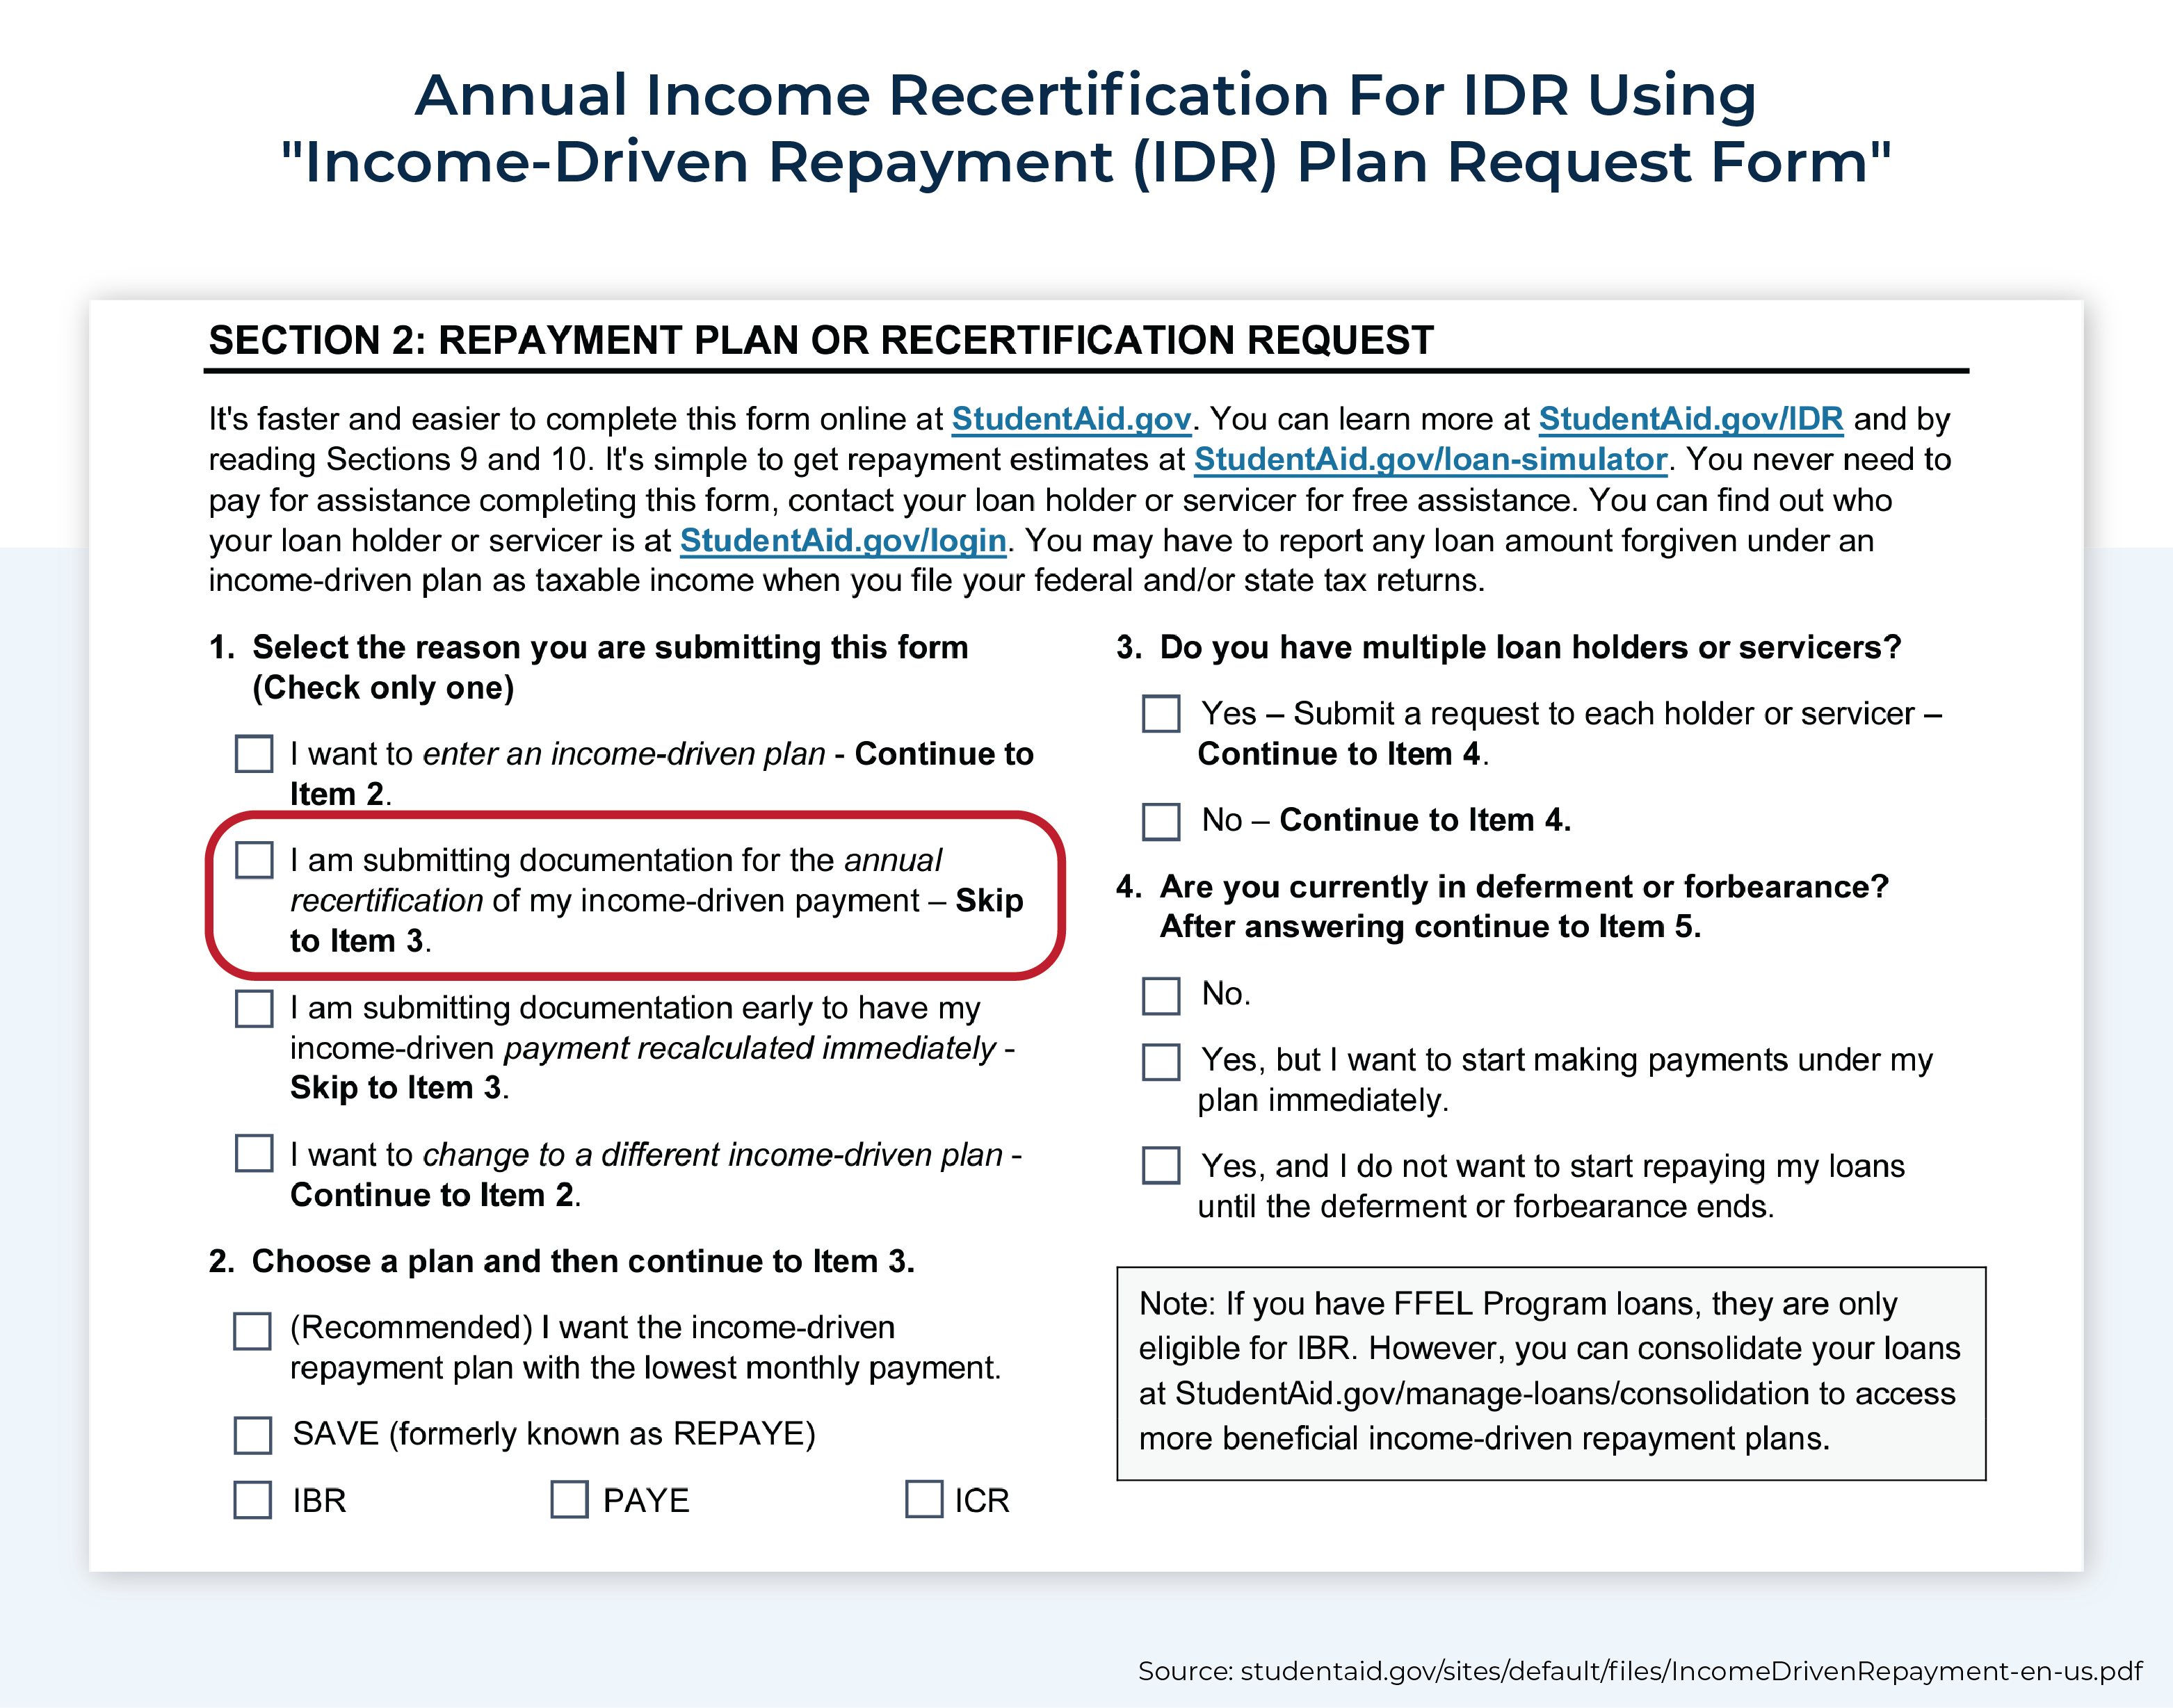 Annual Income Recertification For IDR Using IRA Plan Request Form